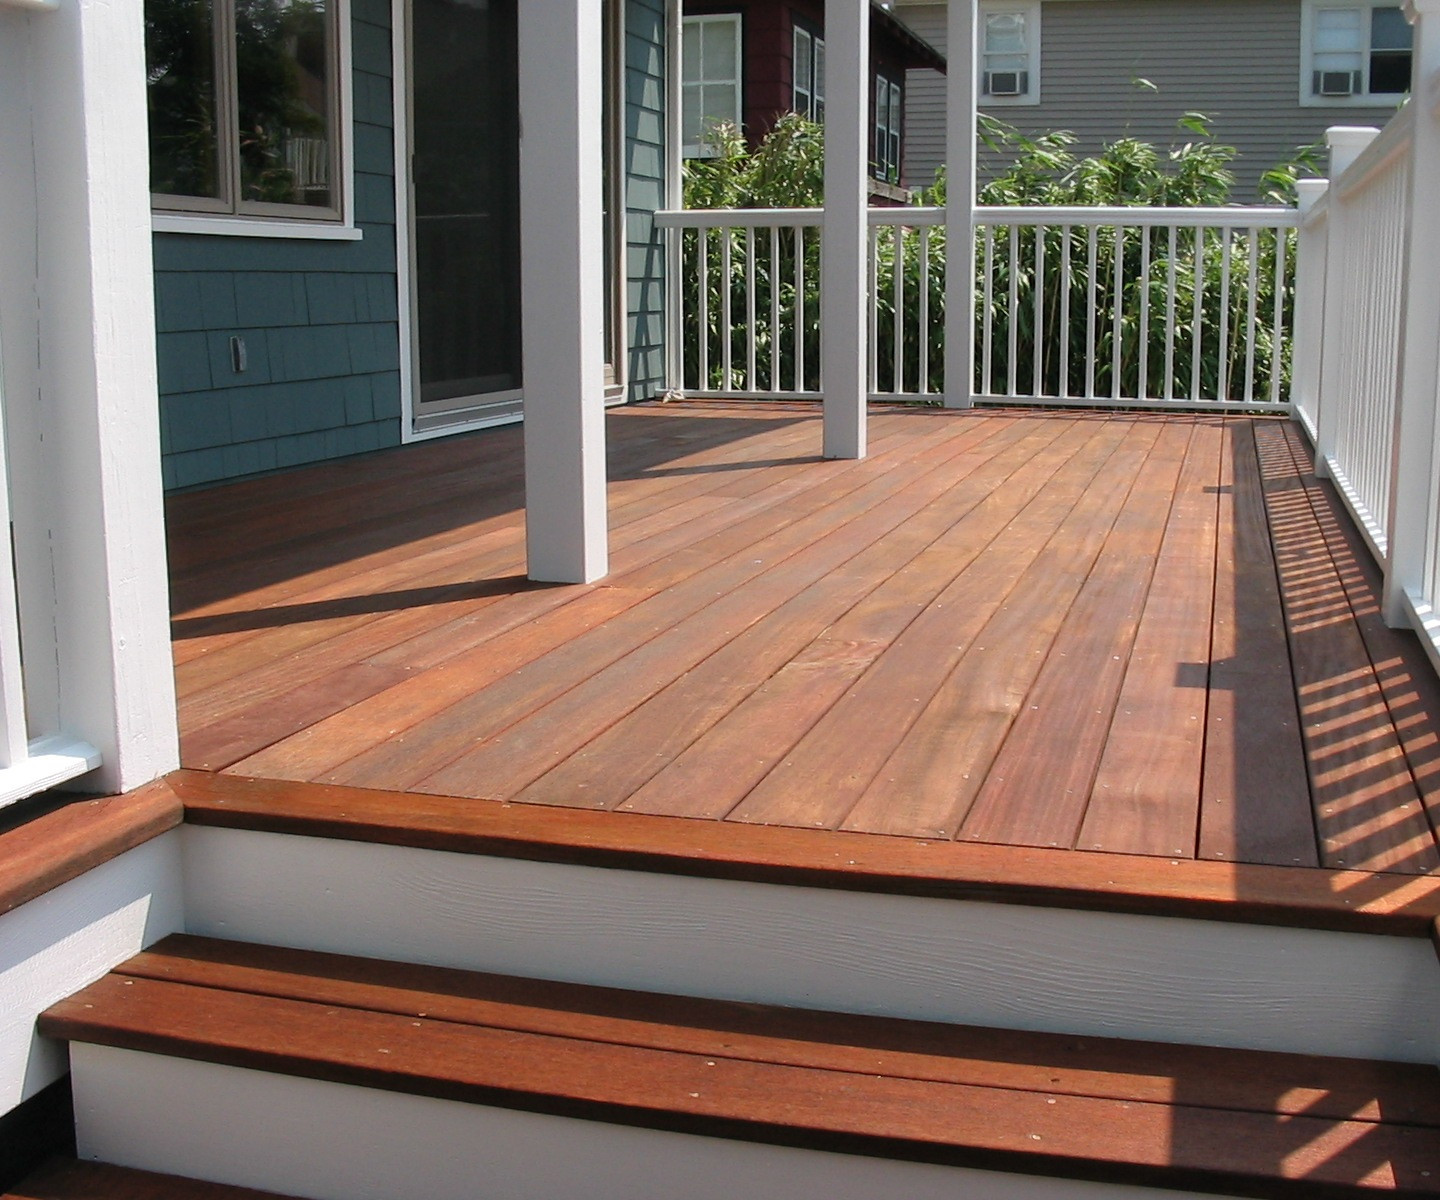 Paint Or Stain Deck
 How ten Should You Stain Your Deck – Freeland Painting